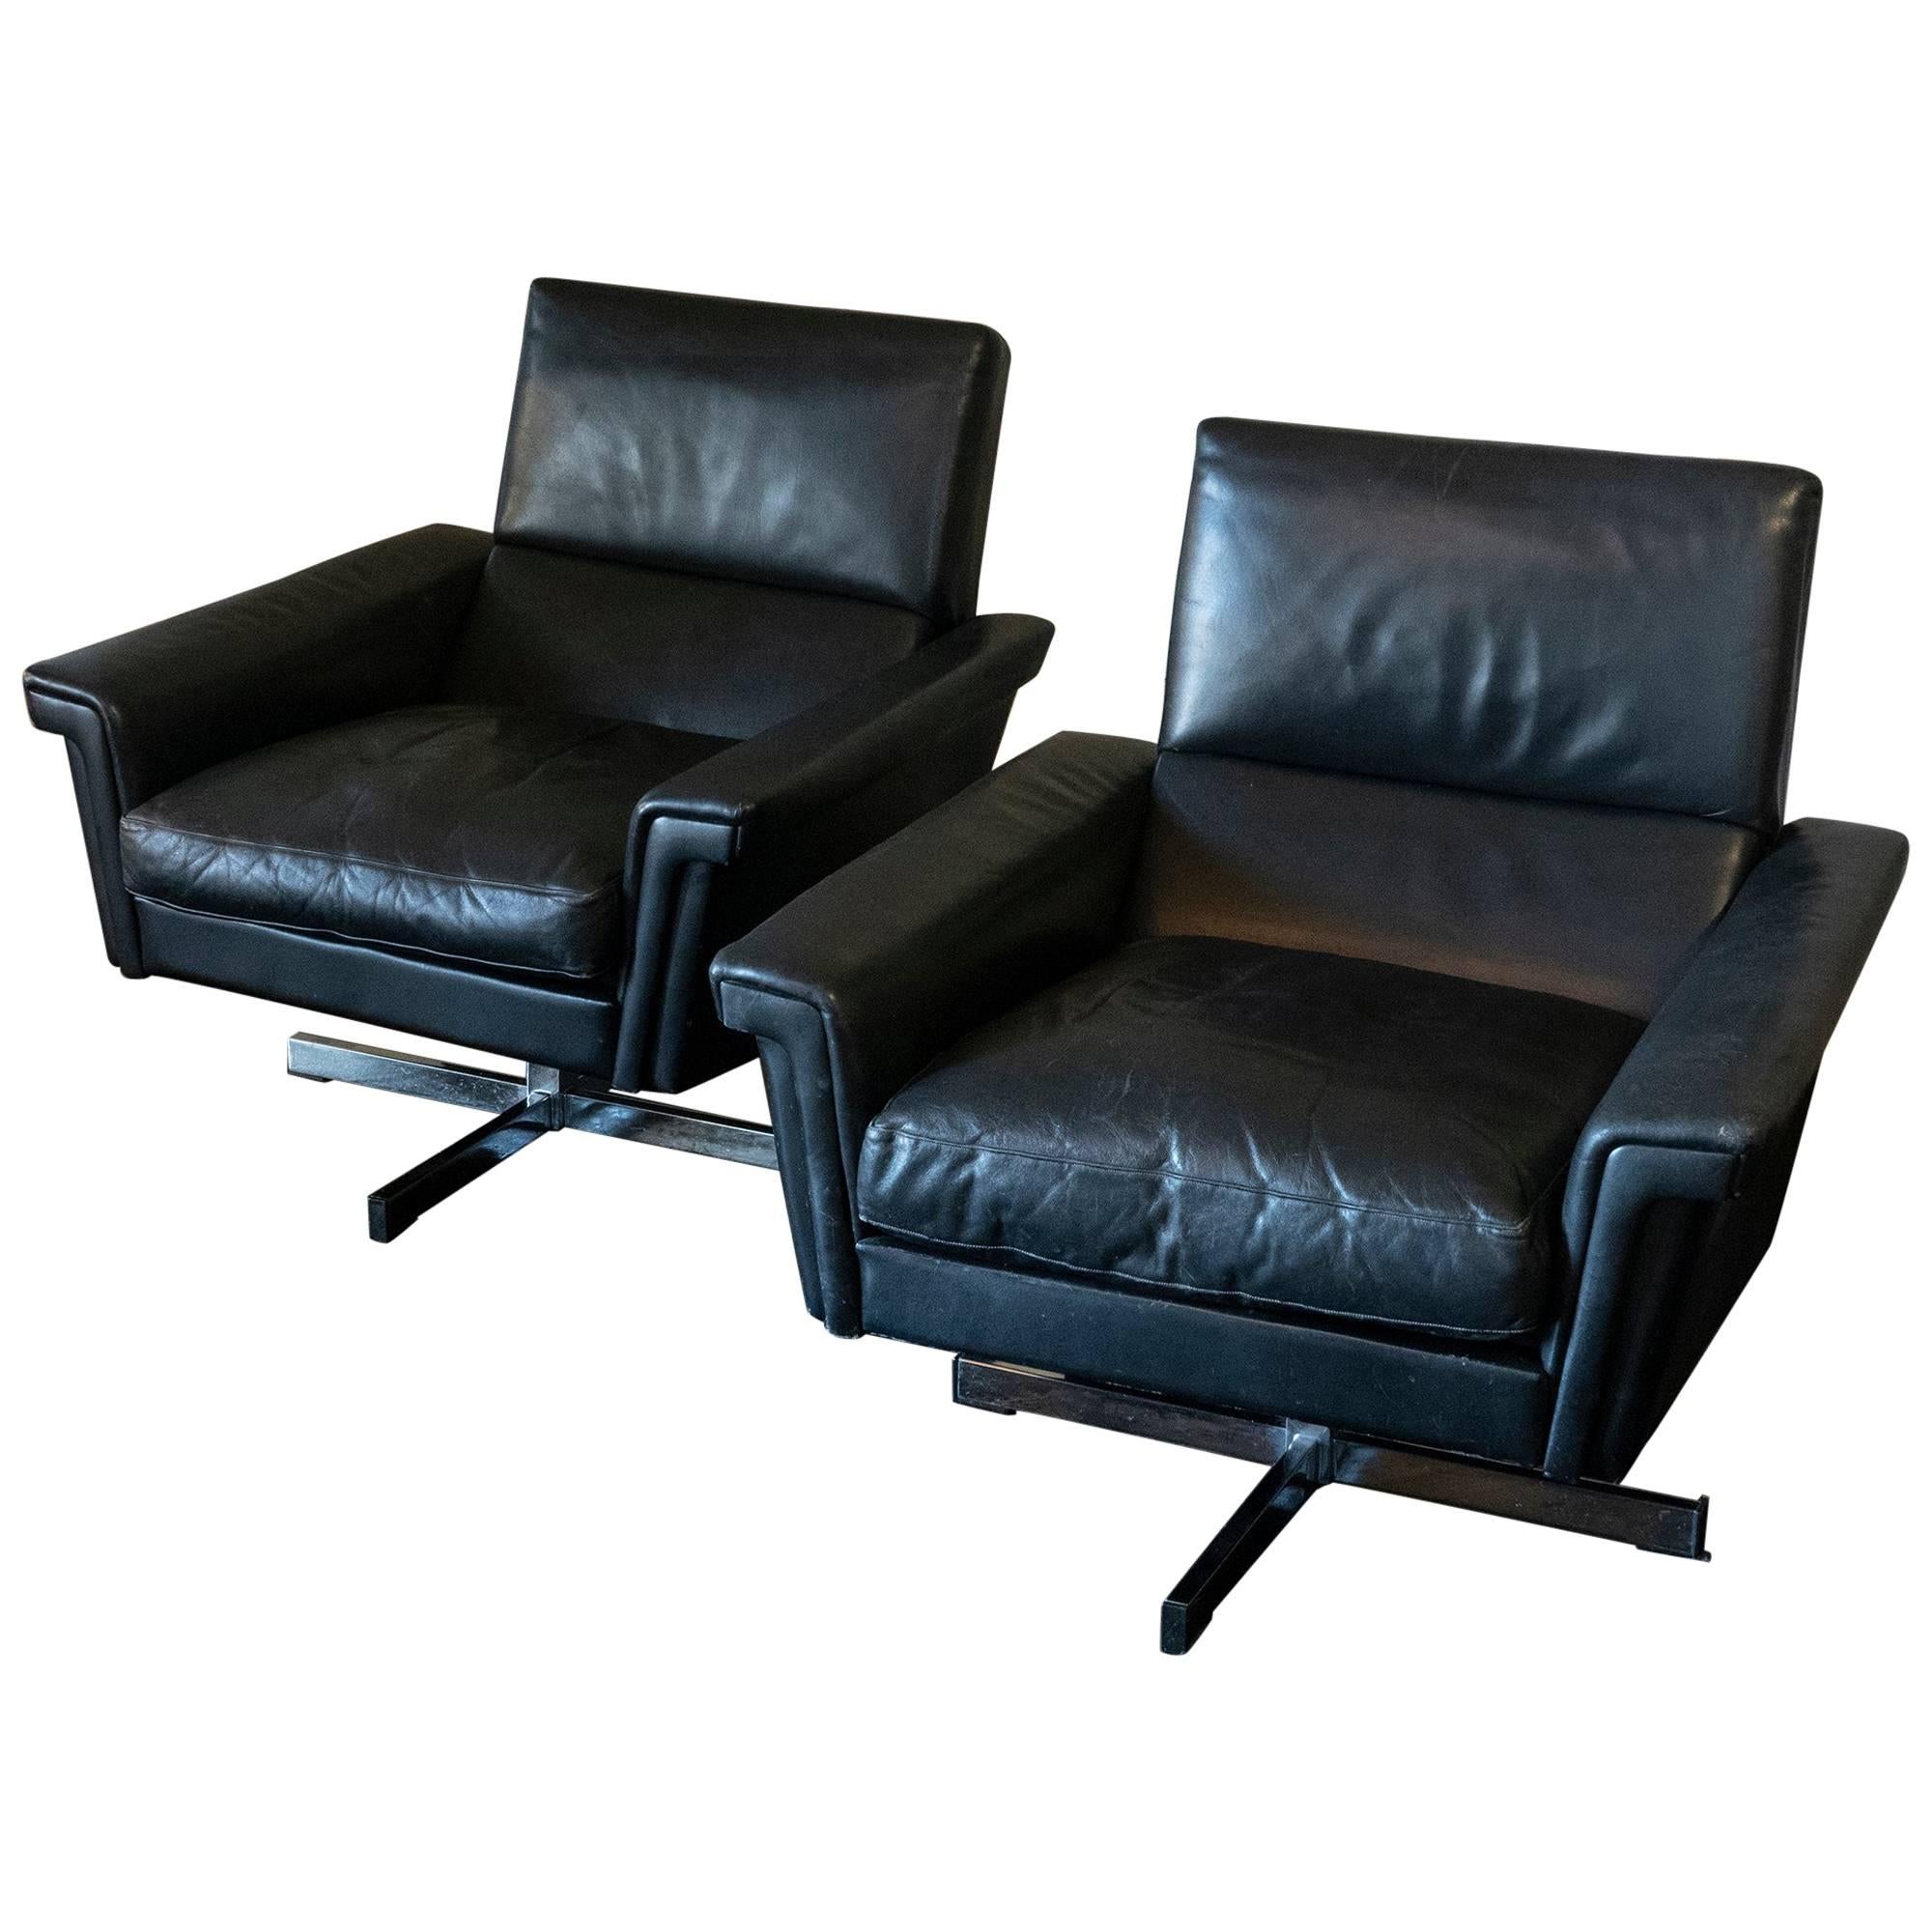 Pair of Black Leather Swivel Armchairs, France, 1970s